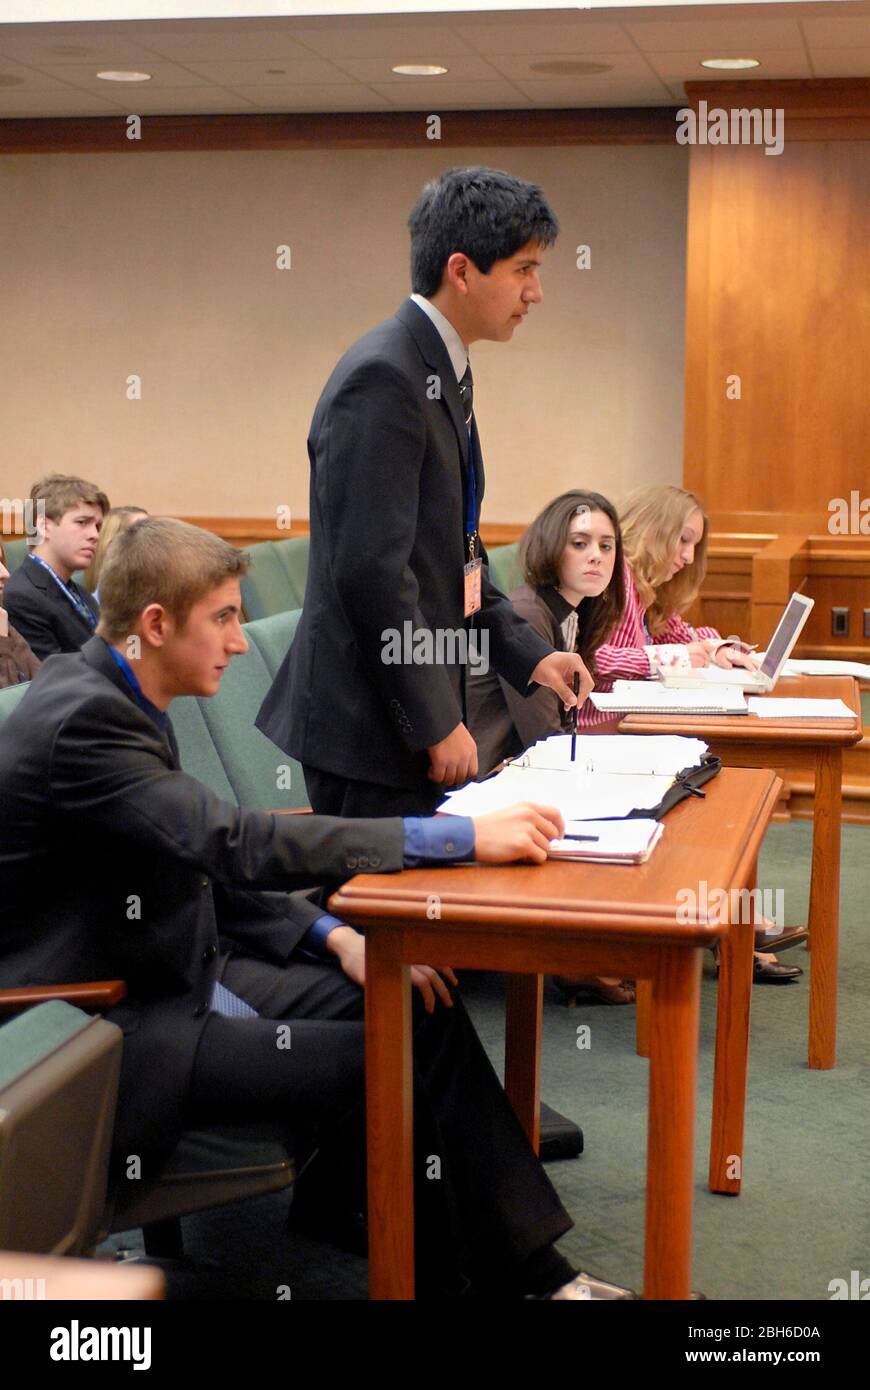 Austin Texas USA: High school students acting as lawyers participate in mock court hearings as part of YMCA Youth in Government program at the State Capitol. Students learn the legal profession by acting out parts in mock trials in competition with their peers. ©Bob Daemmrich Stock Photo